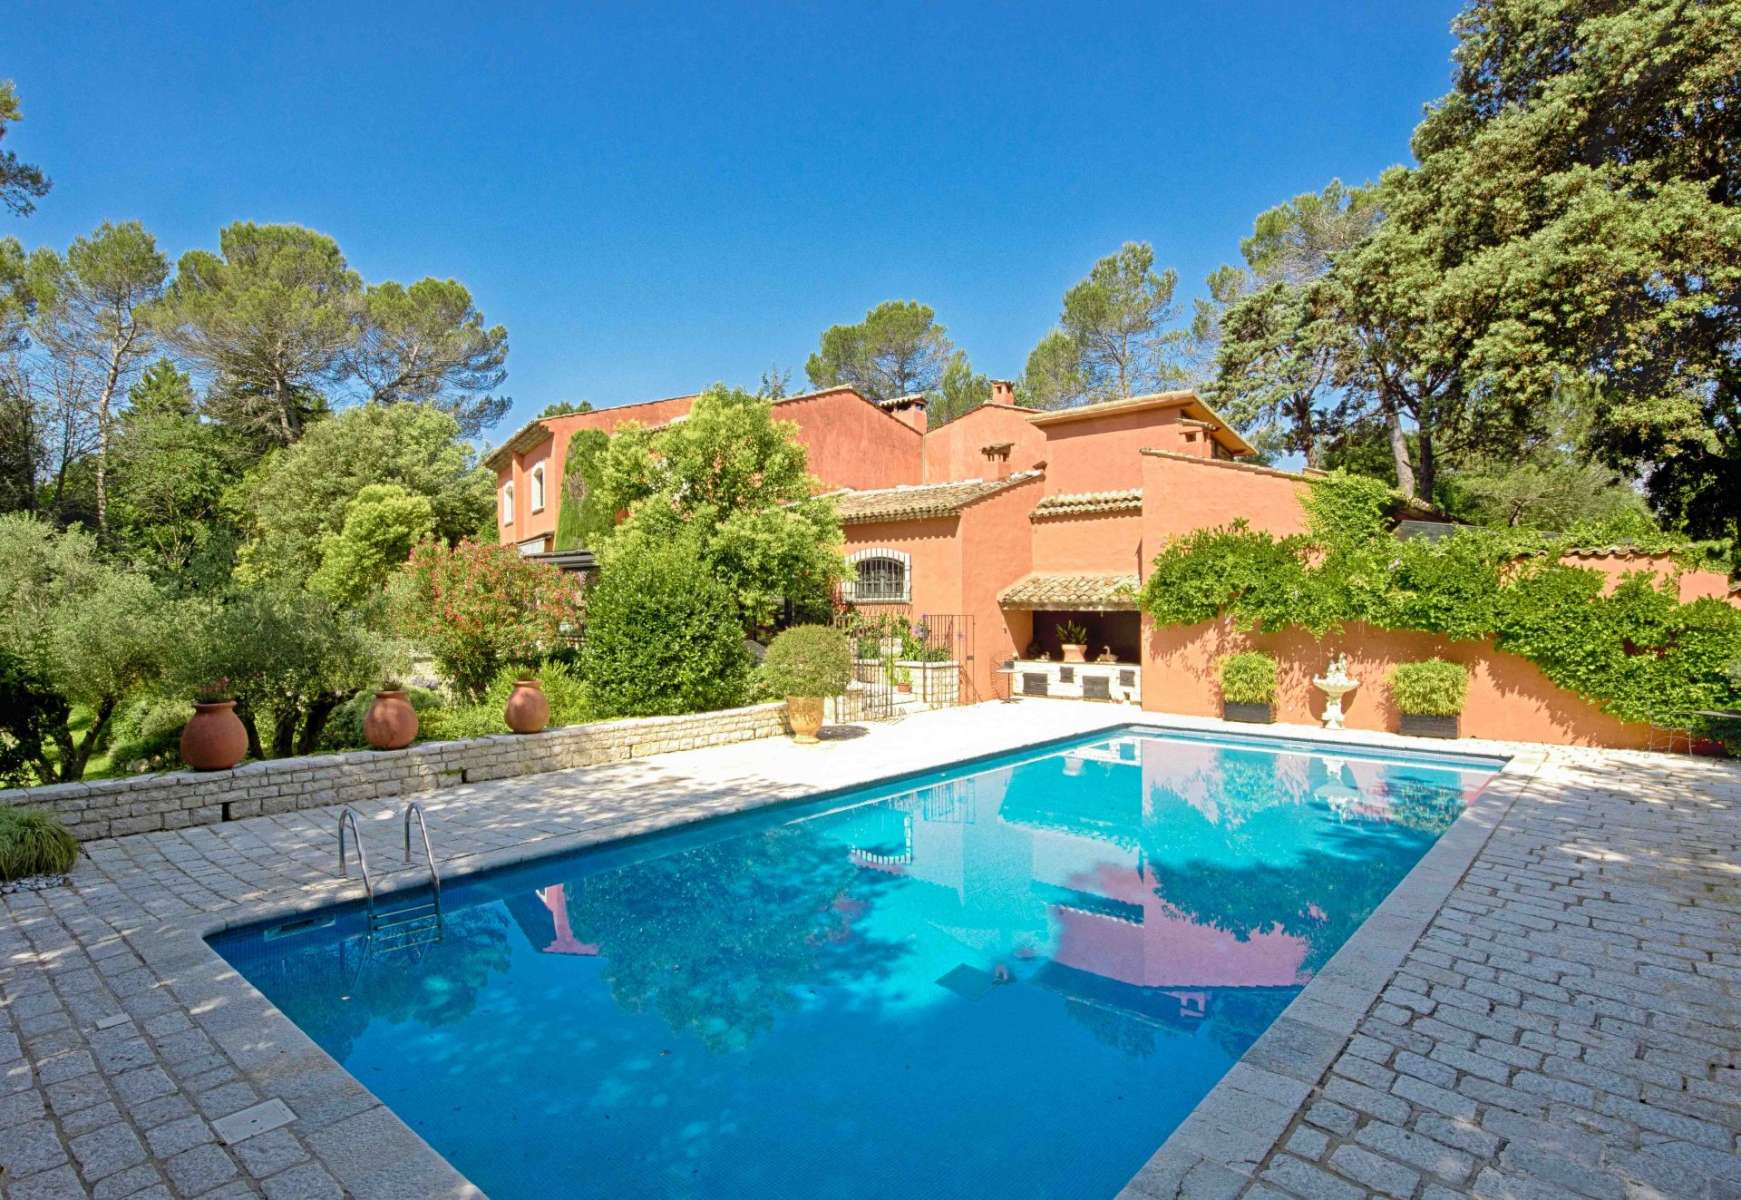 Home in gated community of Mougins close to golf club